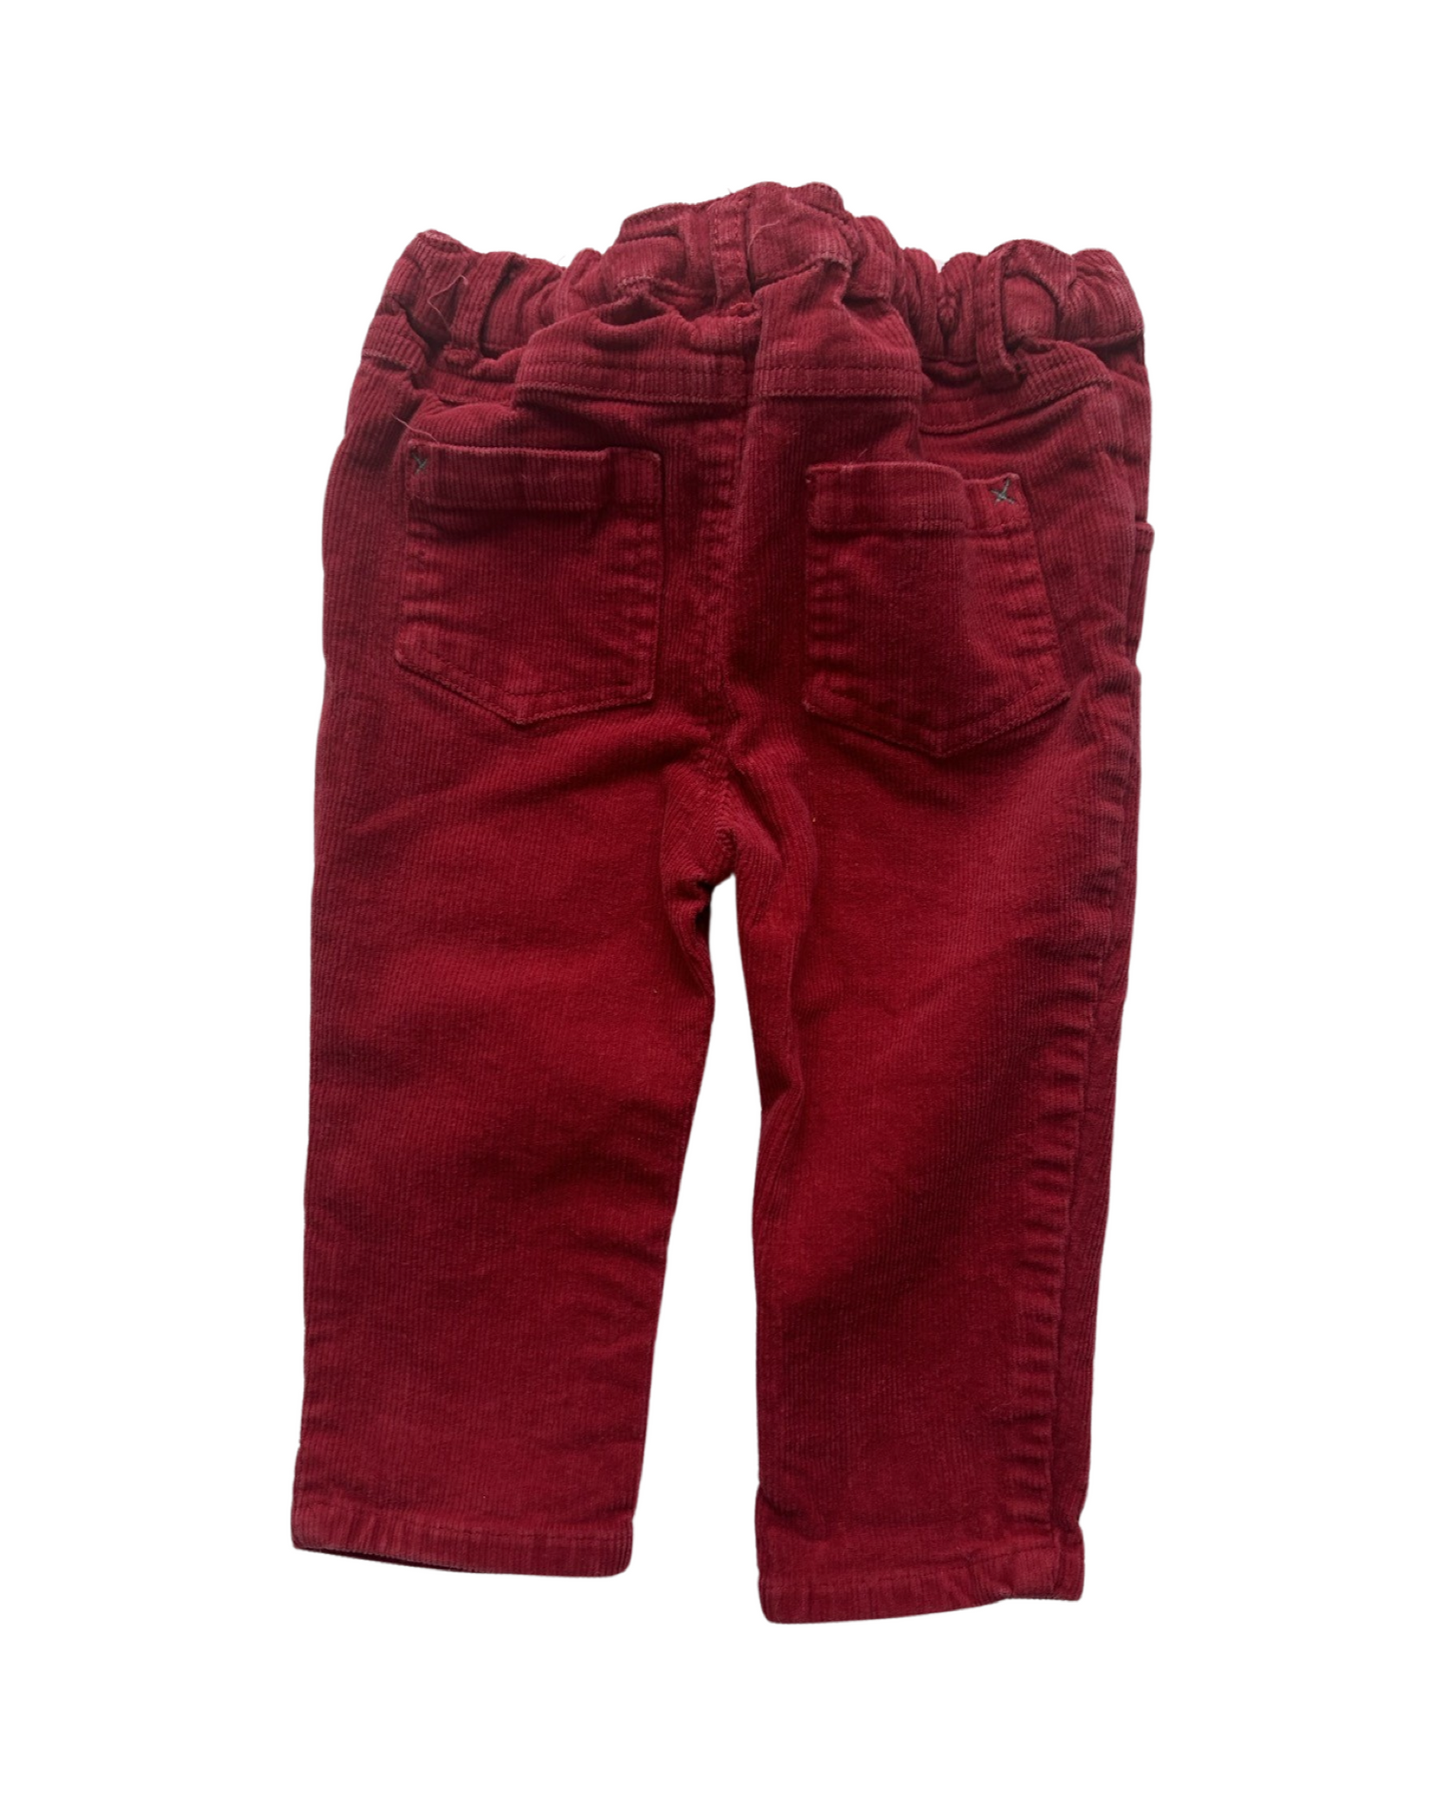 John Lewis red corduroy trousers (size 6-9mths)